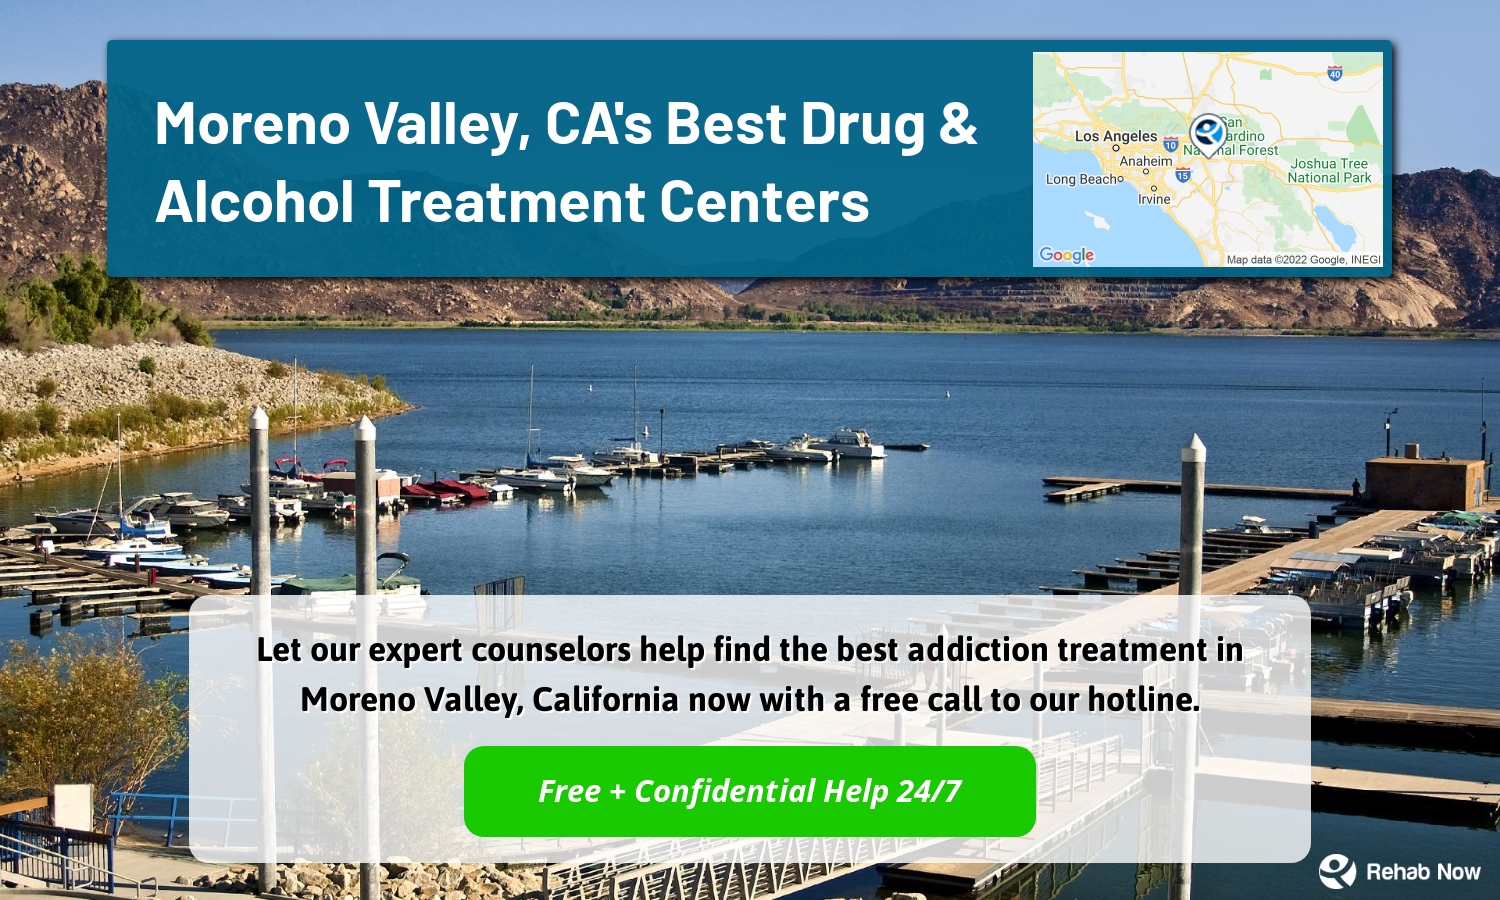 Let our expert counselors help find the best addiction treatment in Moreno Valley, California now with a free call to our hotline.